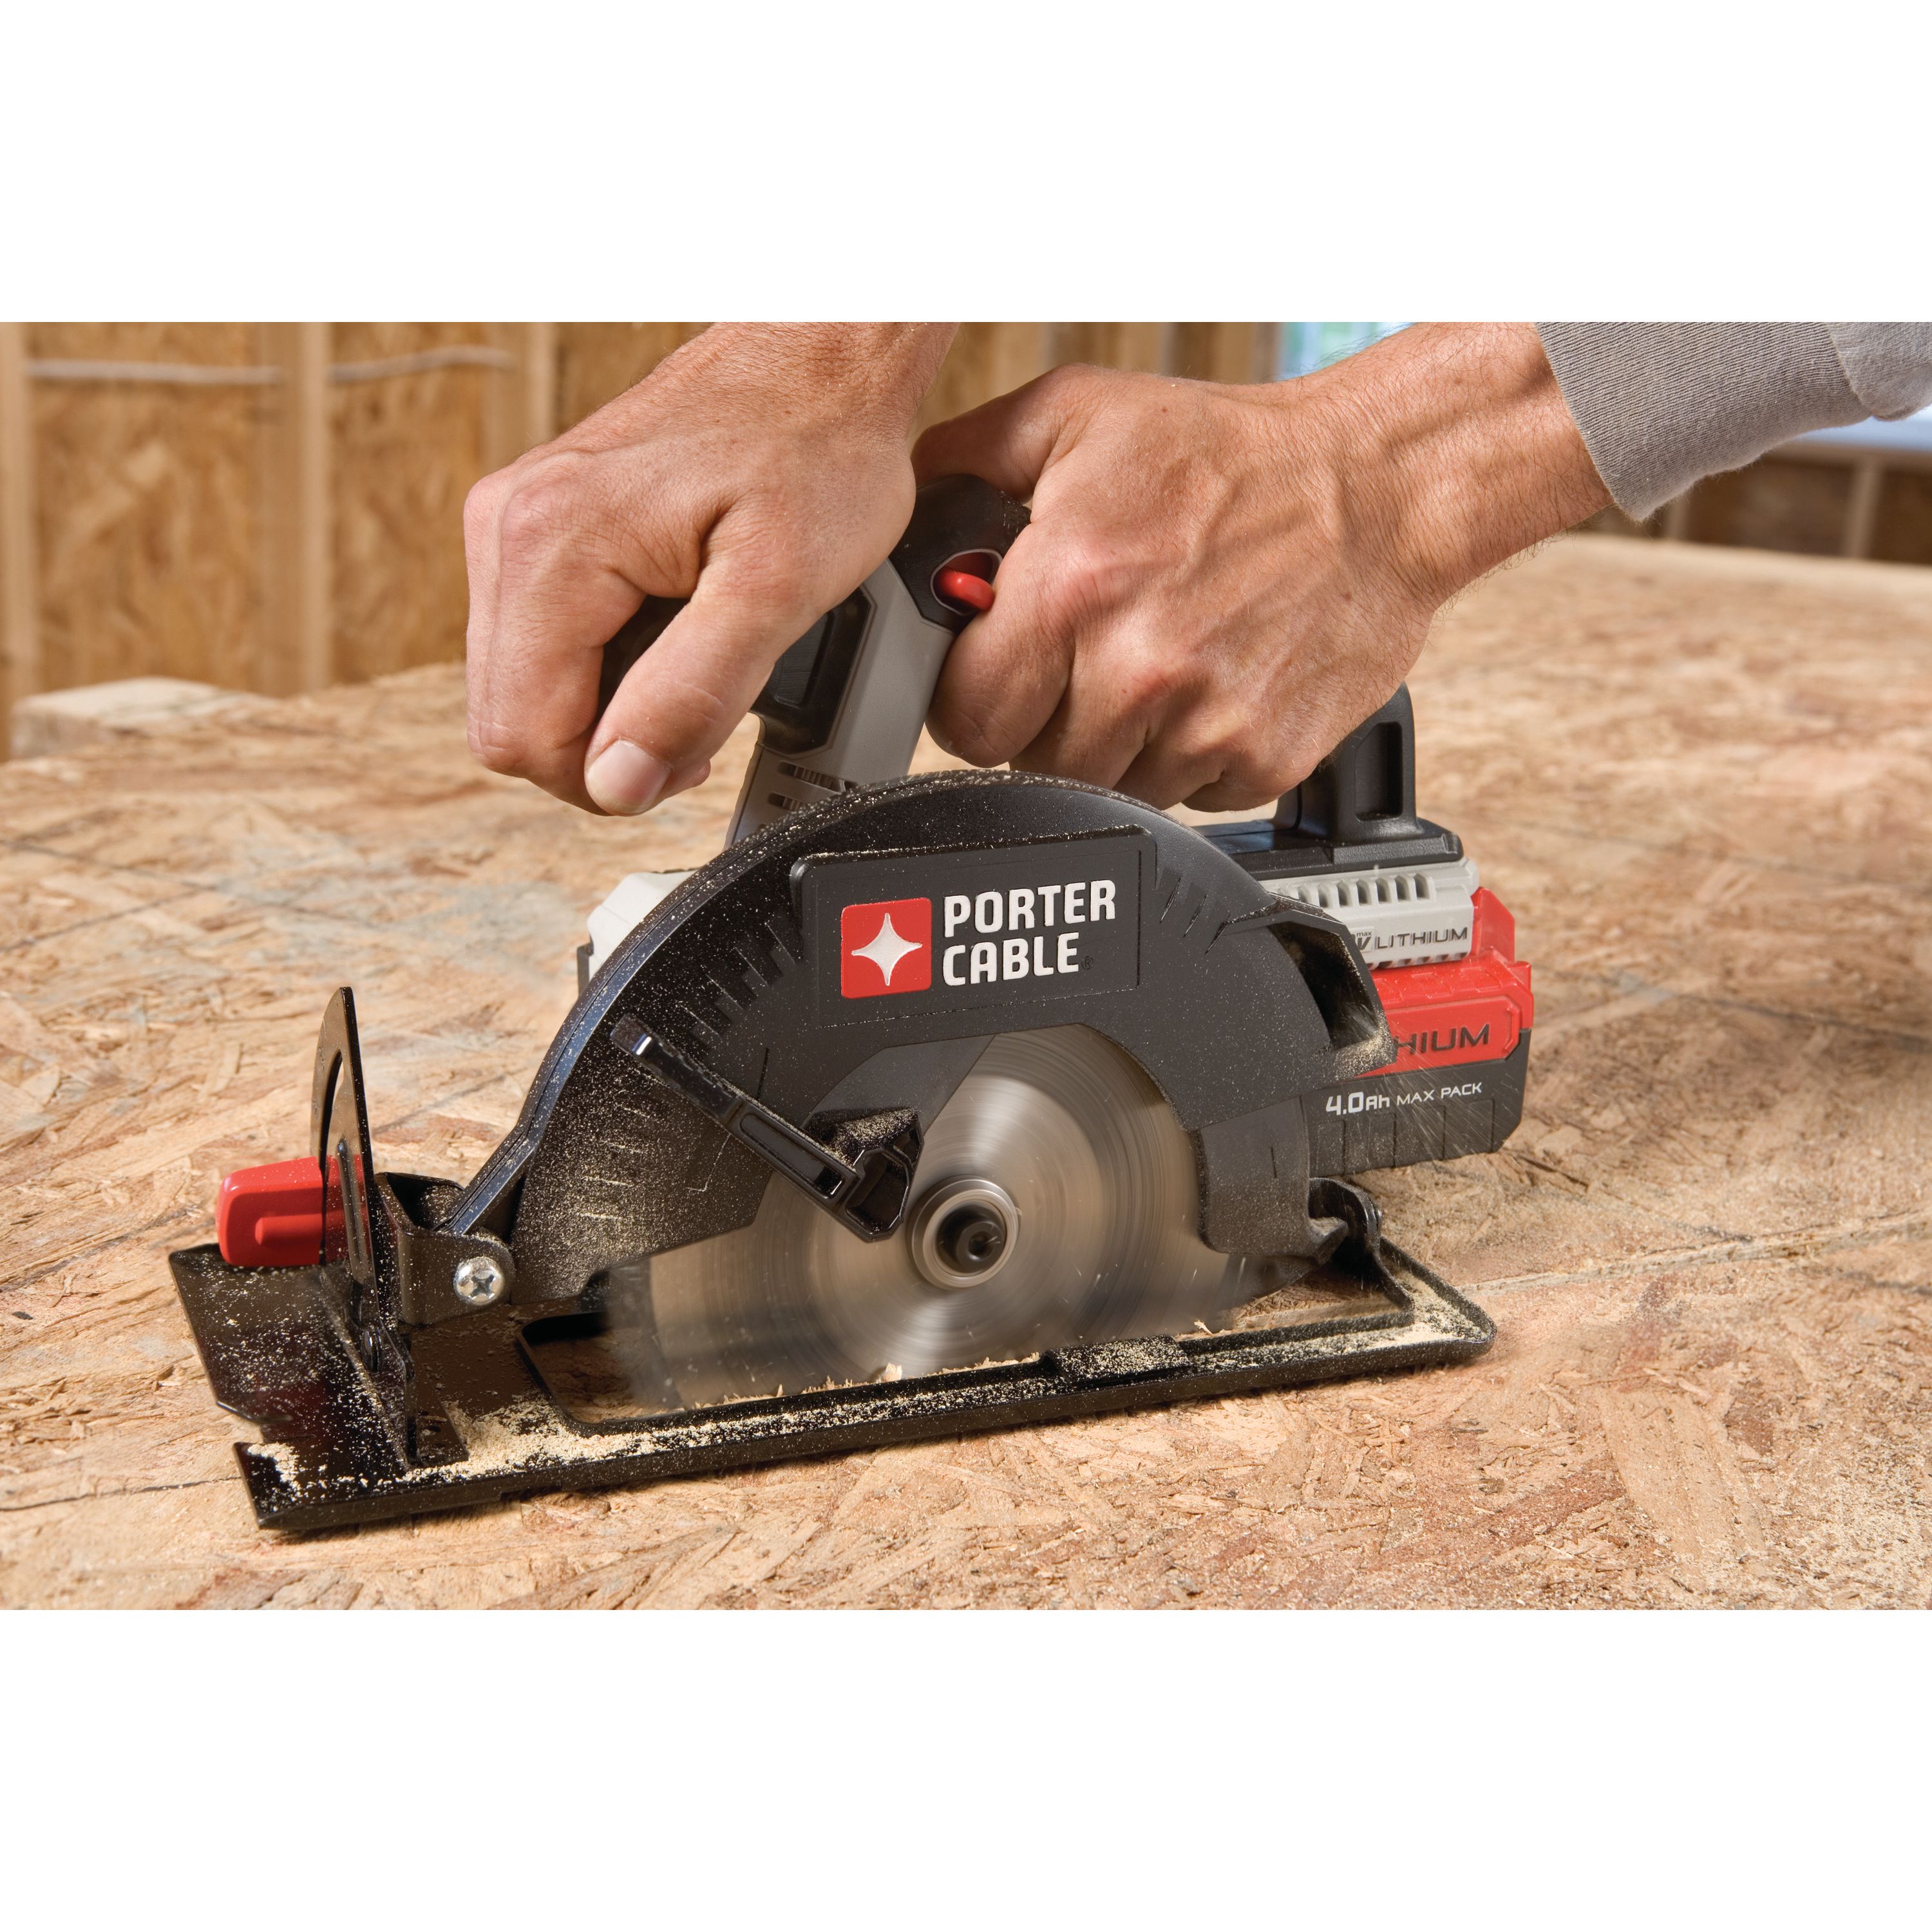 PORTER CABLE 20V MAX Lithium-Ion 6.5-Inch Cordless Circular Saw (Bare Tool / Battery Sold Separately), PCC660B - image 4 of 5